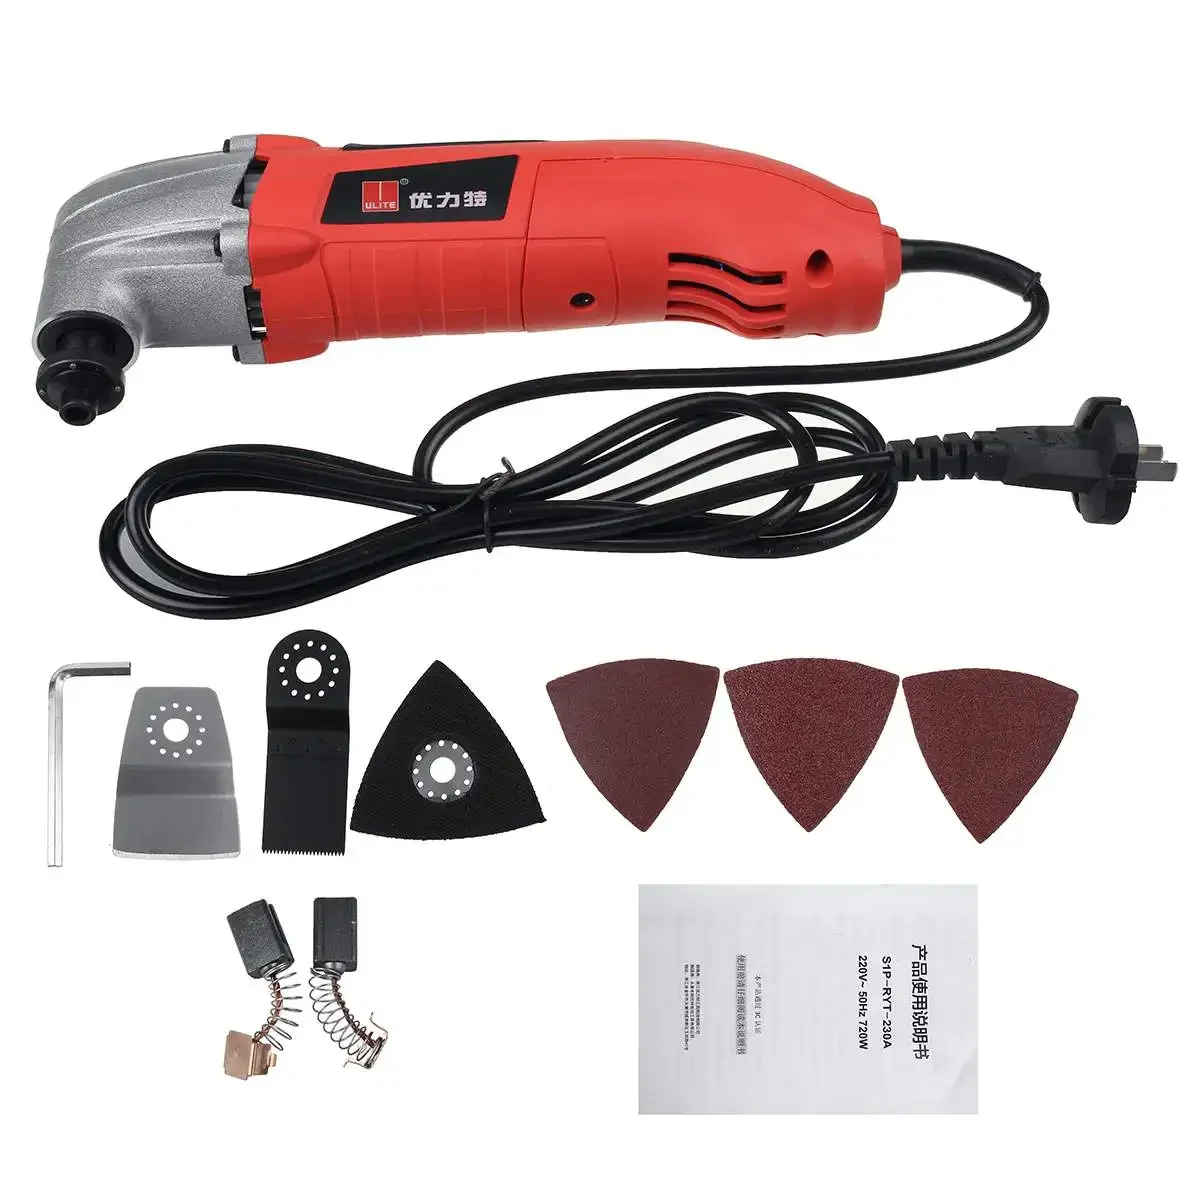 

720W Multi-Tools Multifunction Tool Oscillating Variable Speed Renovator Electric Home Decoration Trimmer Electric Saw